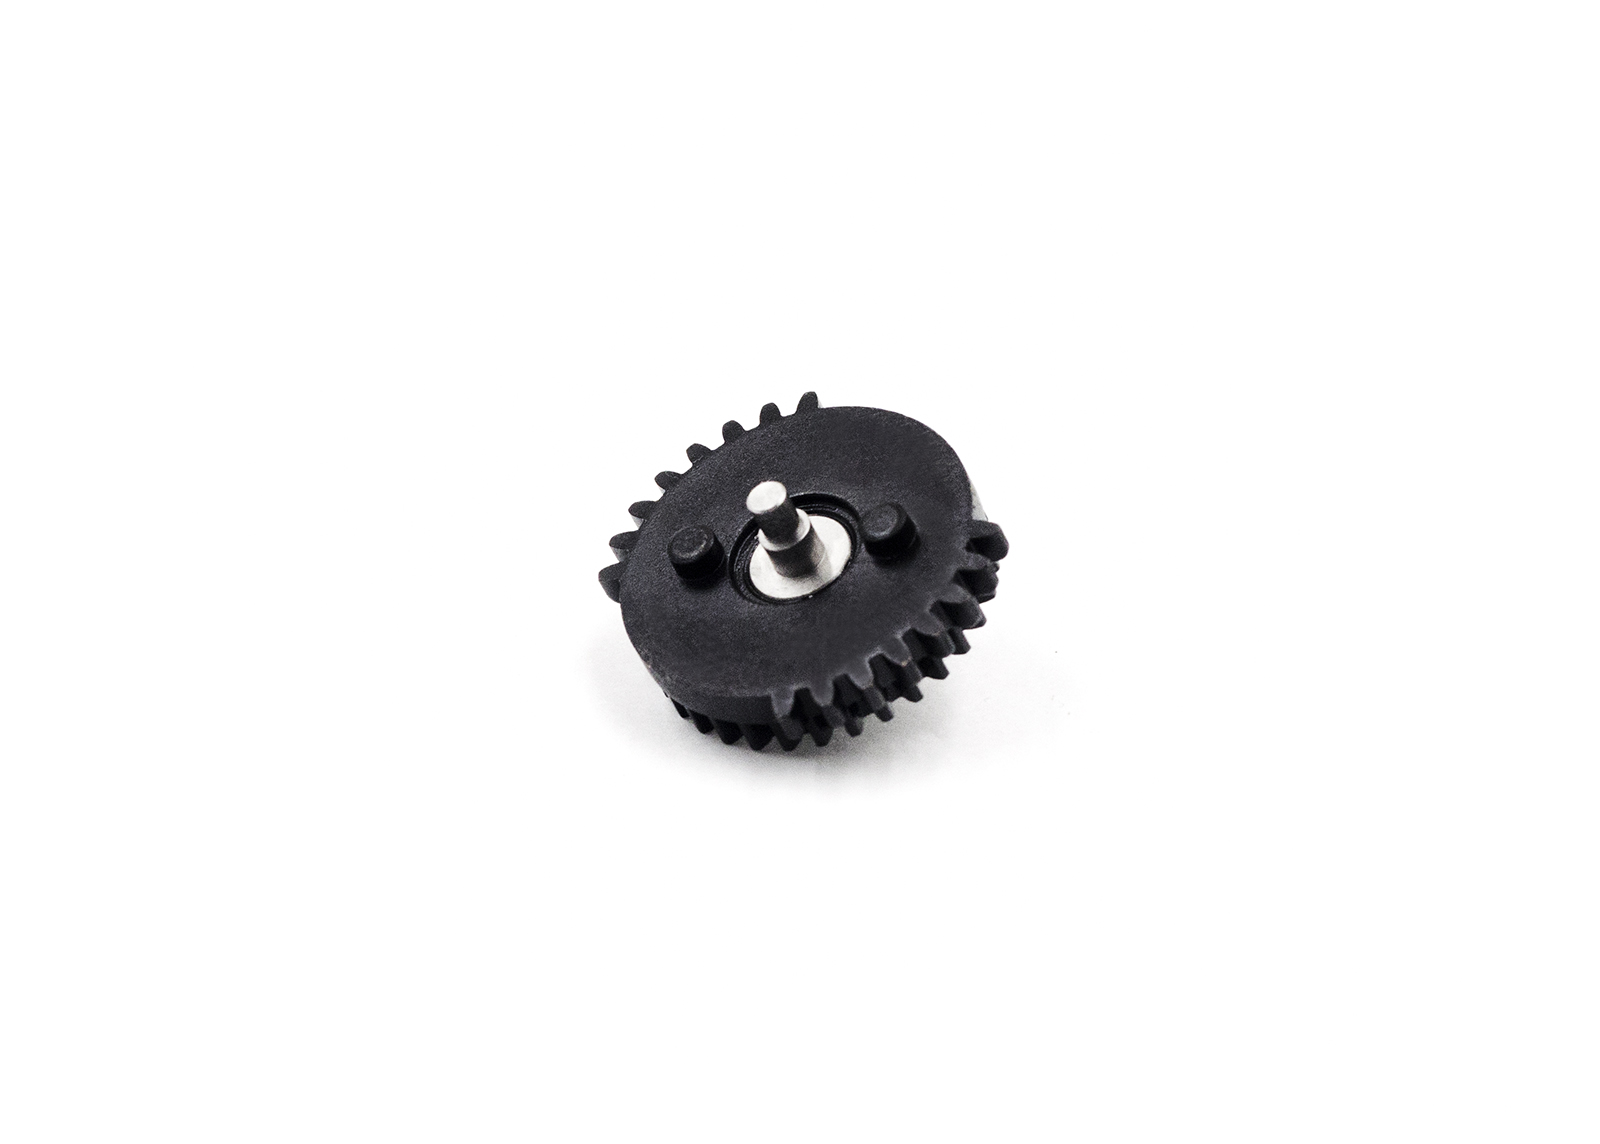 New Quantum Two-Sector Gear for Ver.2/Ver.3/Ver.6 - Modify Airsoft parts